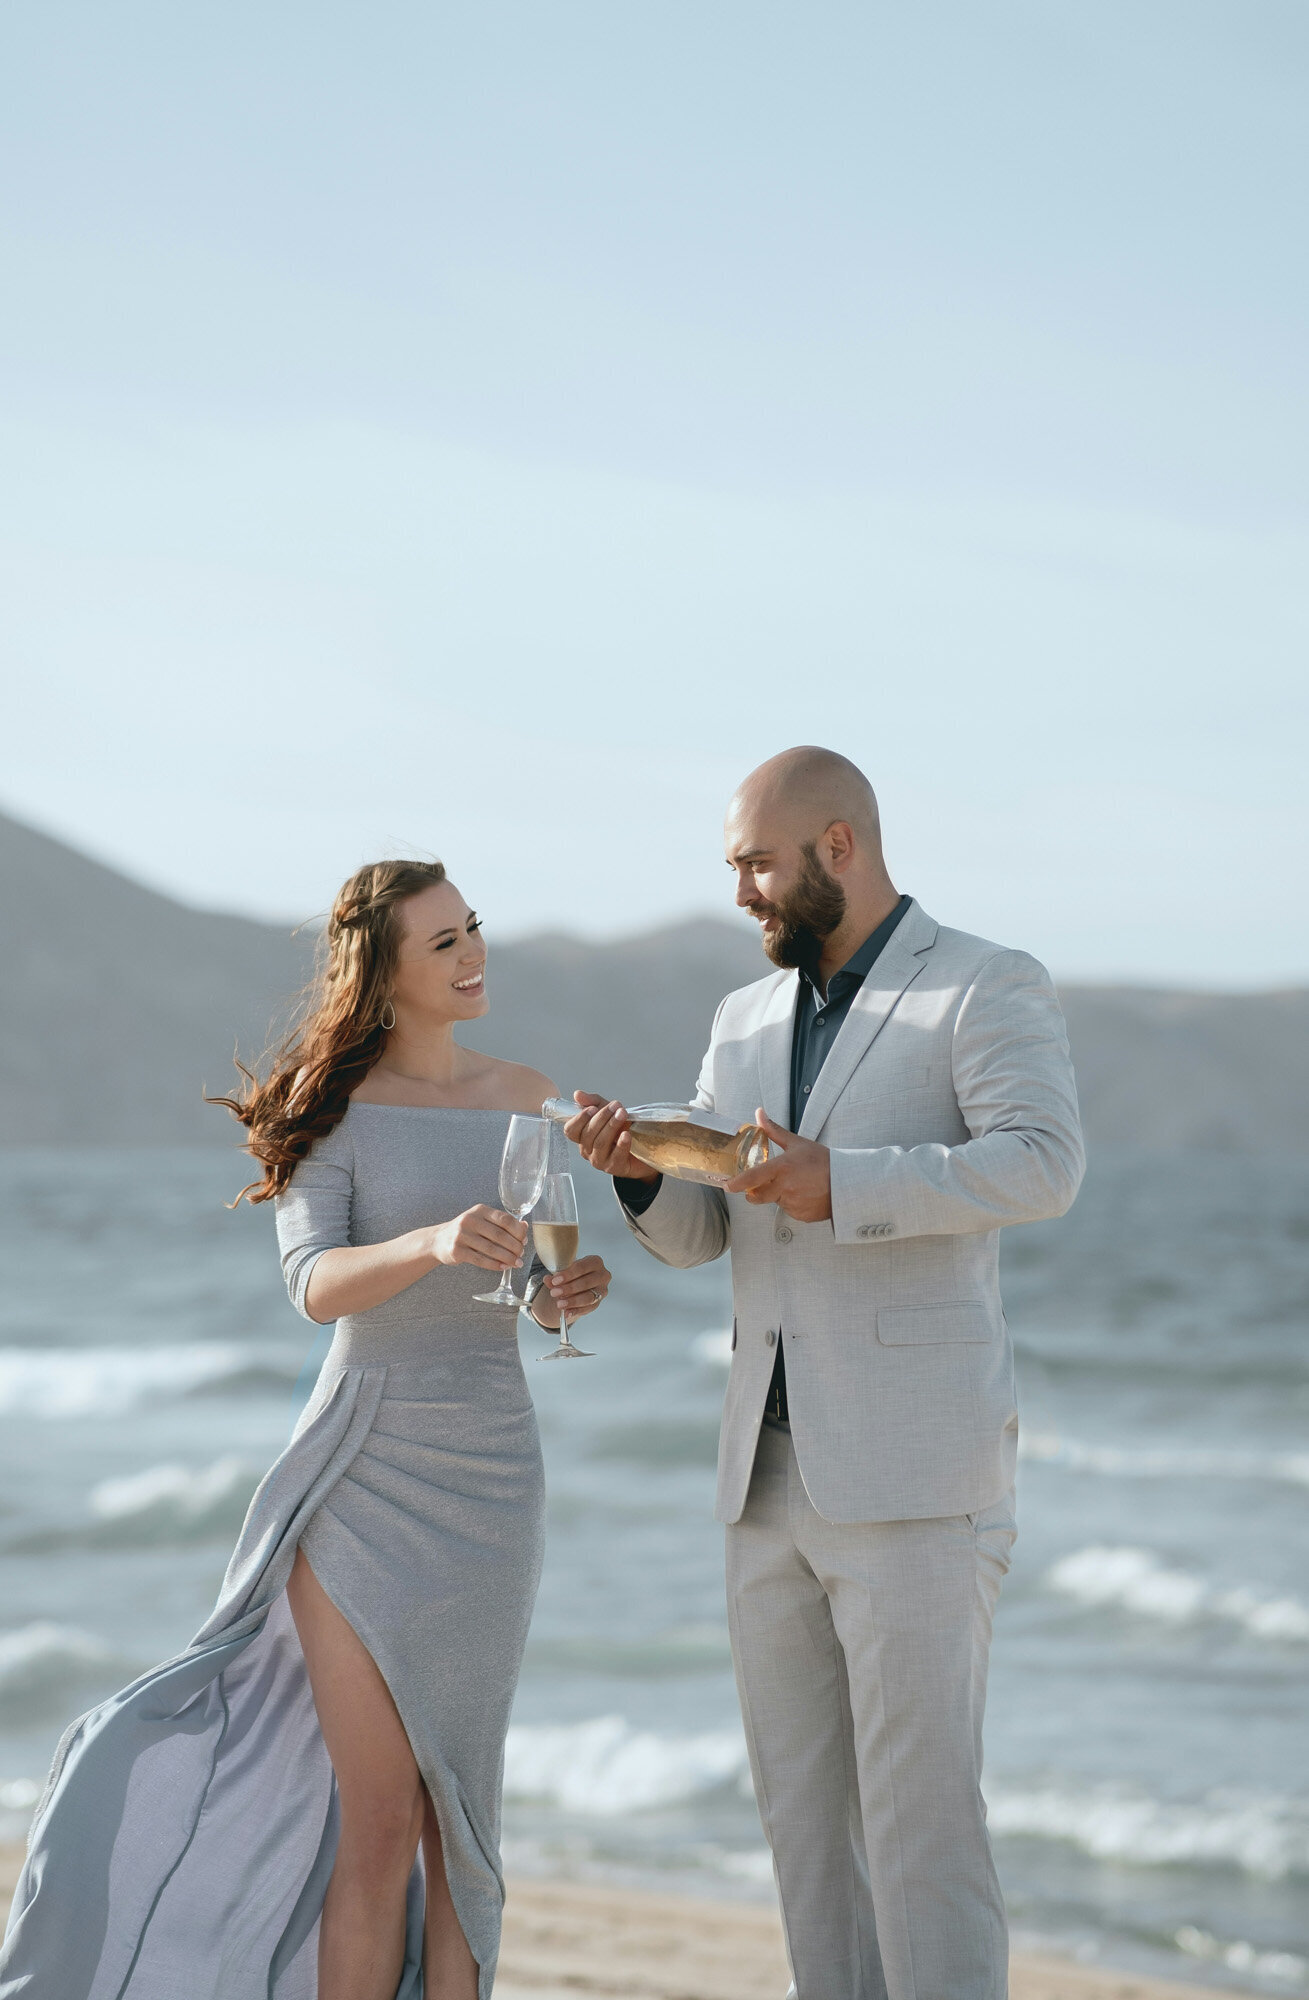 Couple on the seashore while woman holding two wine glasses and man holding a bottle of wine pouring it to the wine glass